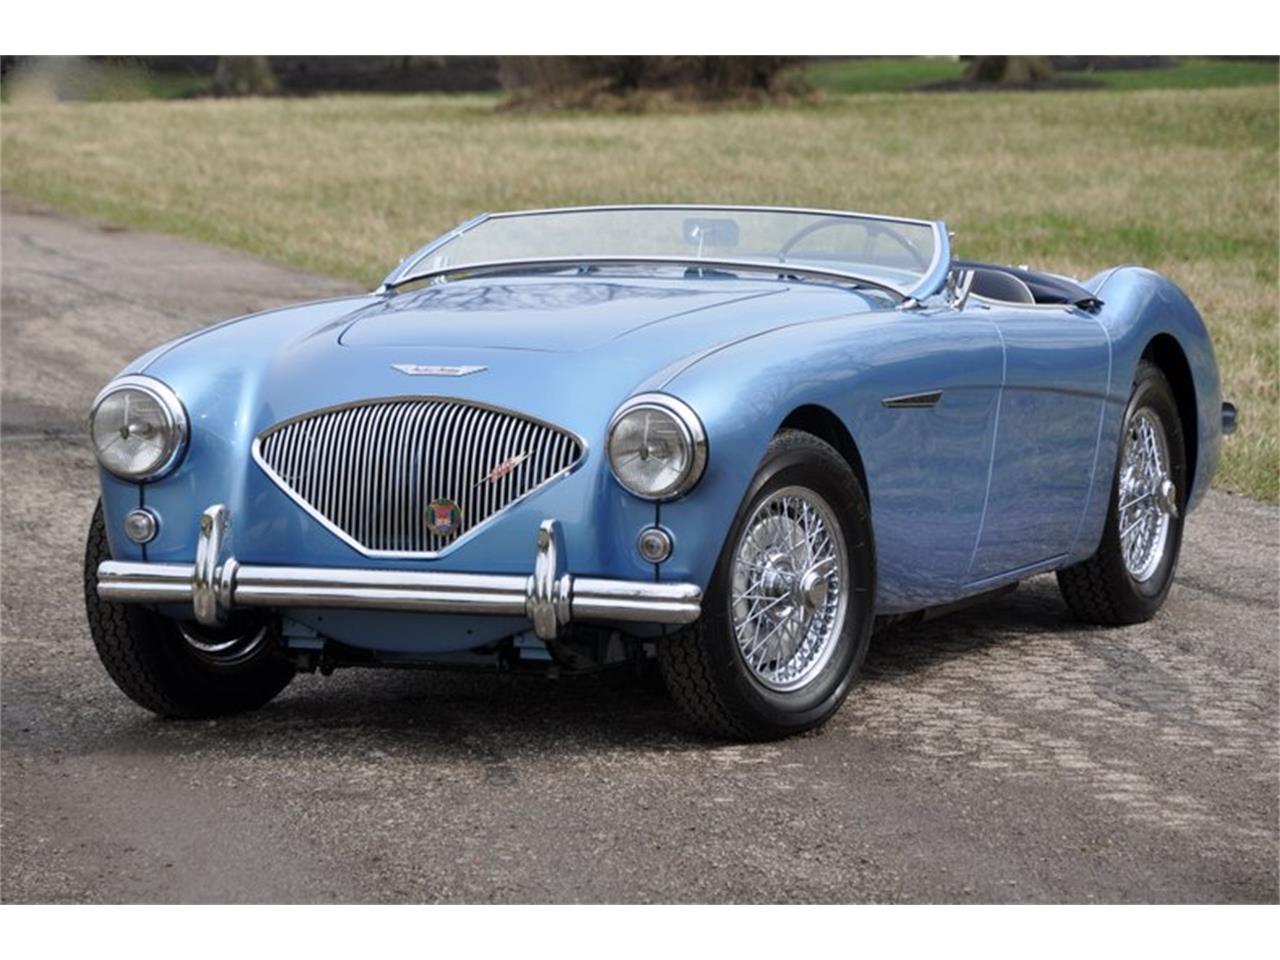 For Sale: 1956 Austin-Healey 100 in Elyria, Ohio for sale in Elyria, OH